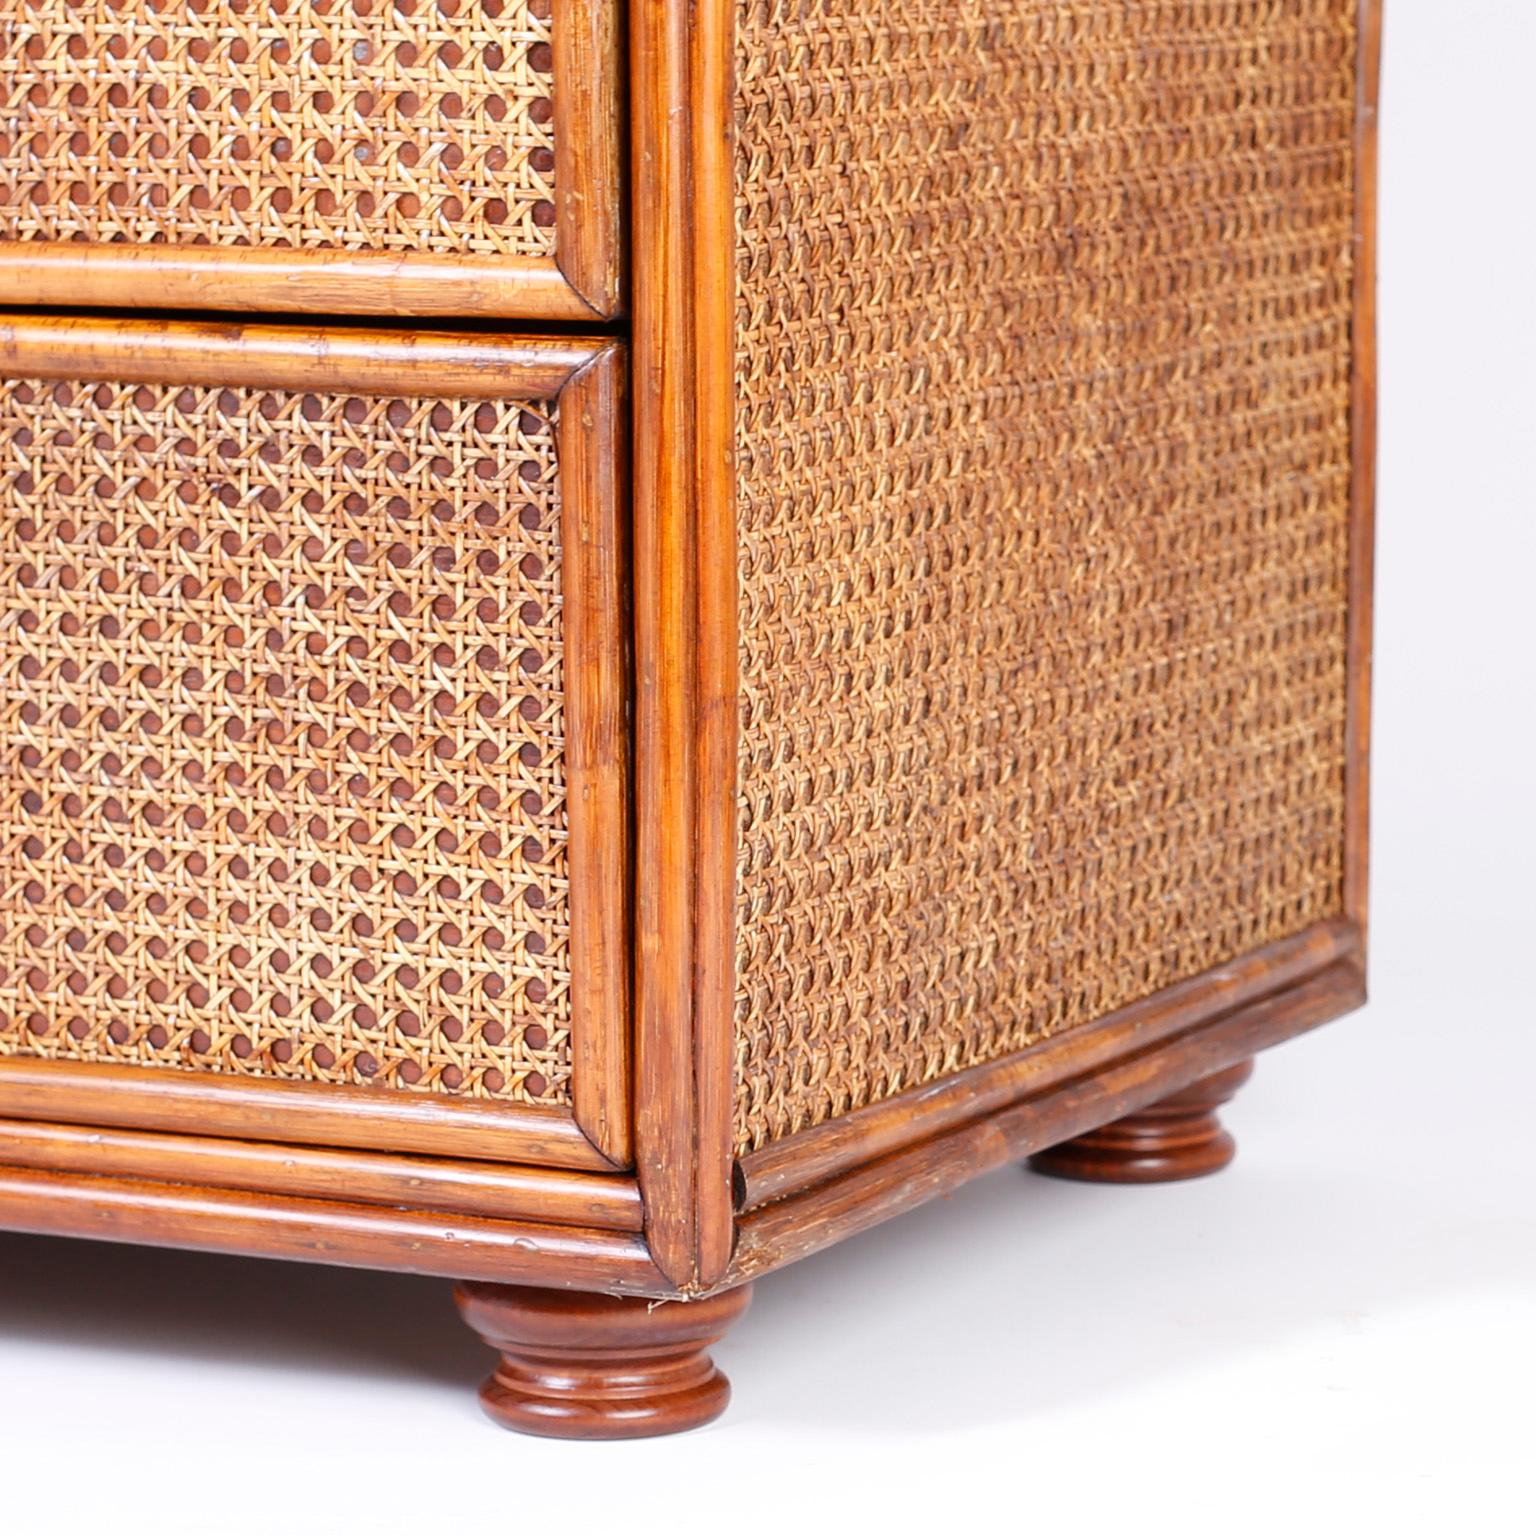 Hand-Woven Midcentury British Colonial Style Rattan and Caned Chest of Drawers